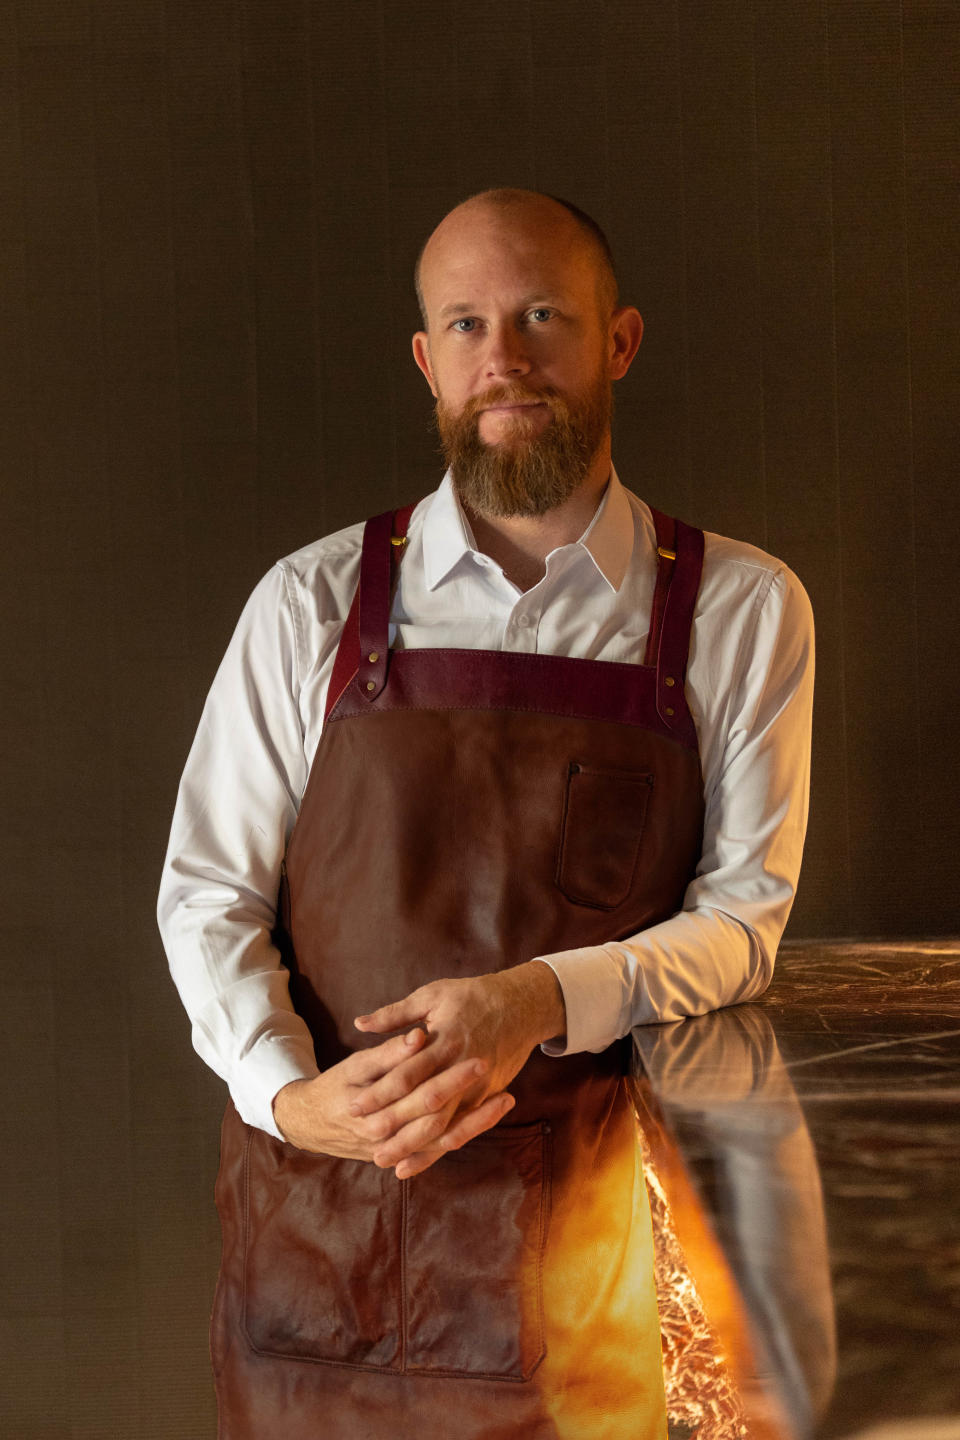 Kenneth Vanhooser will lead the bar menu and service at Four Walls, a new cocktail destination at The Joseph Hotel Nashville.